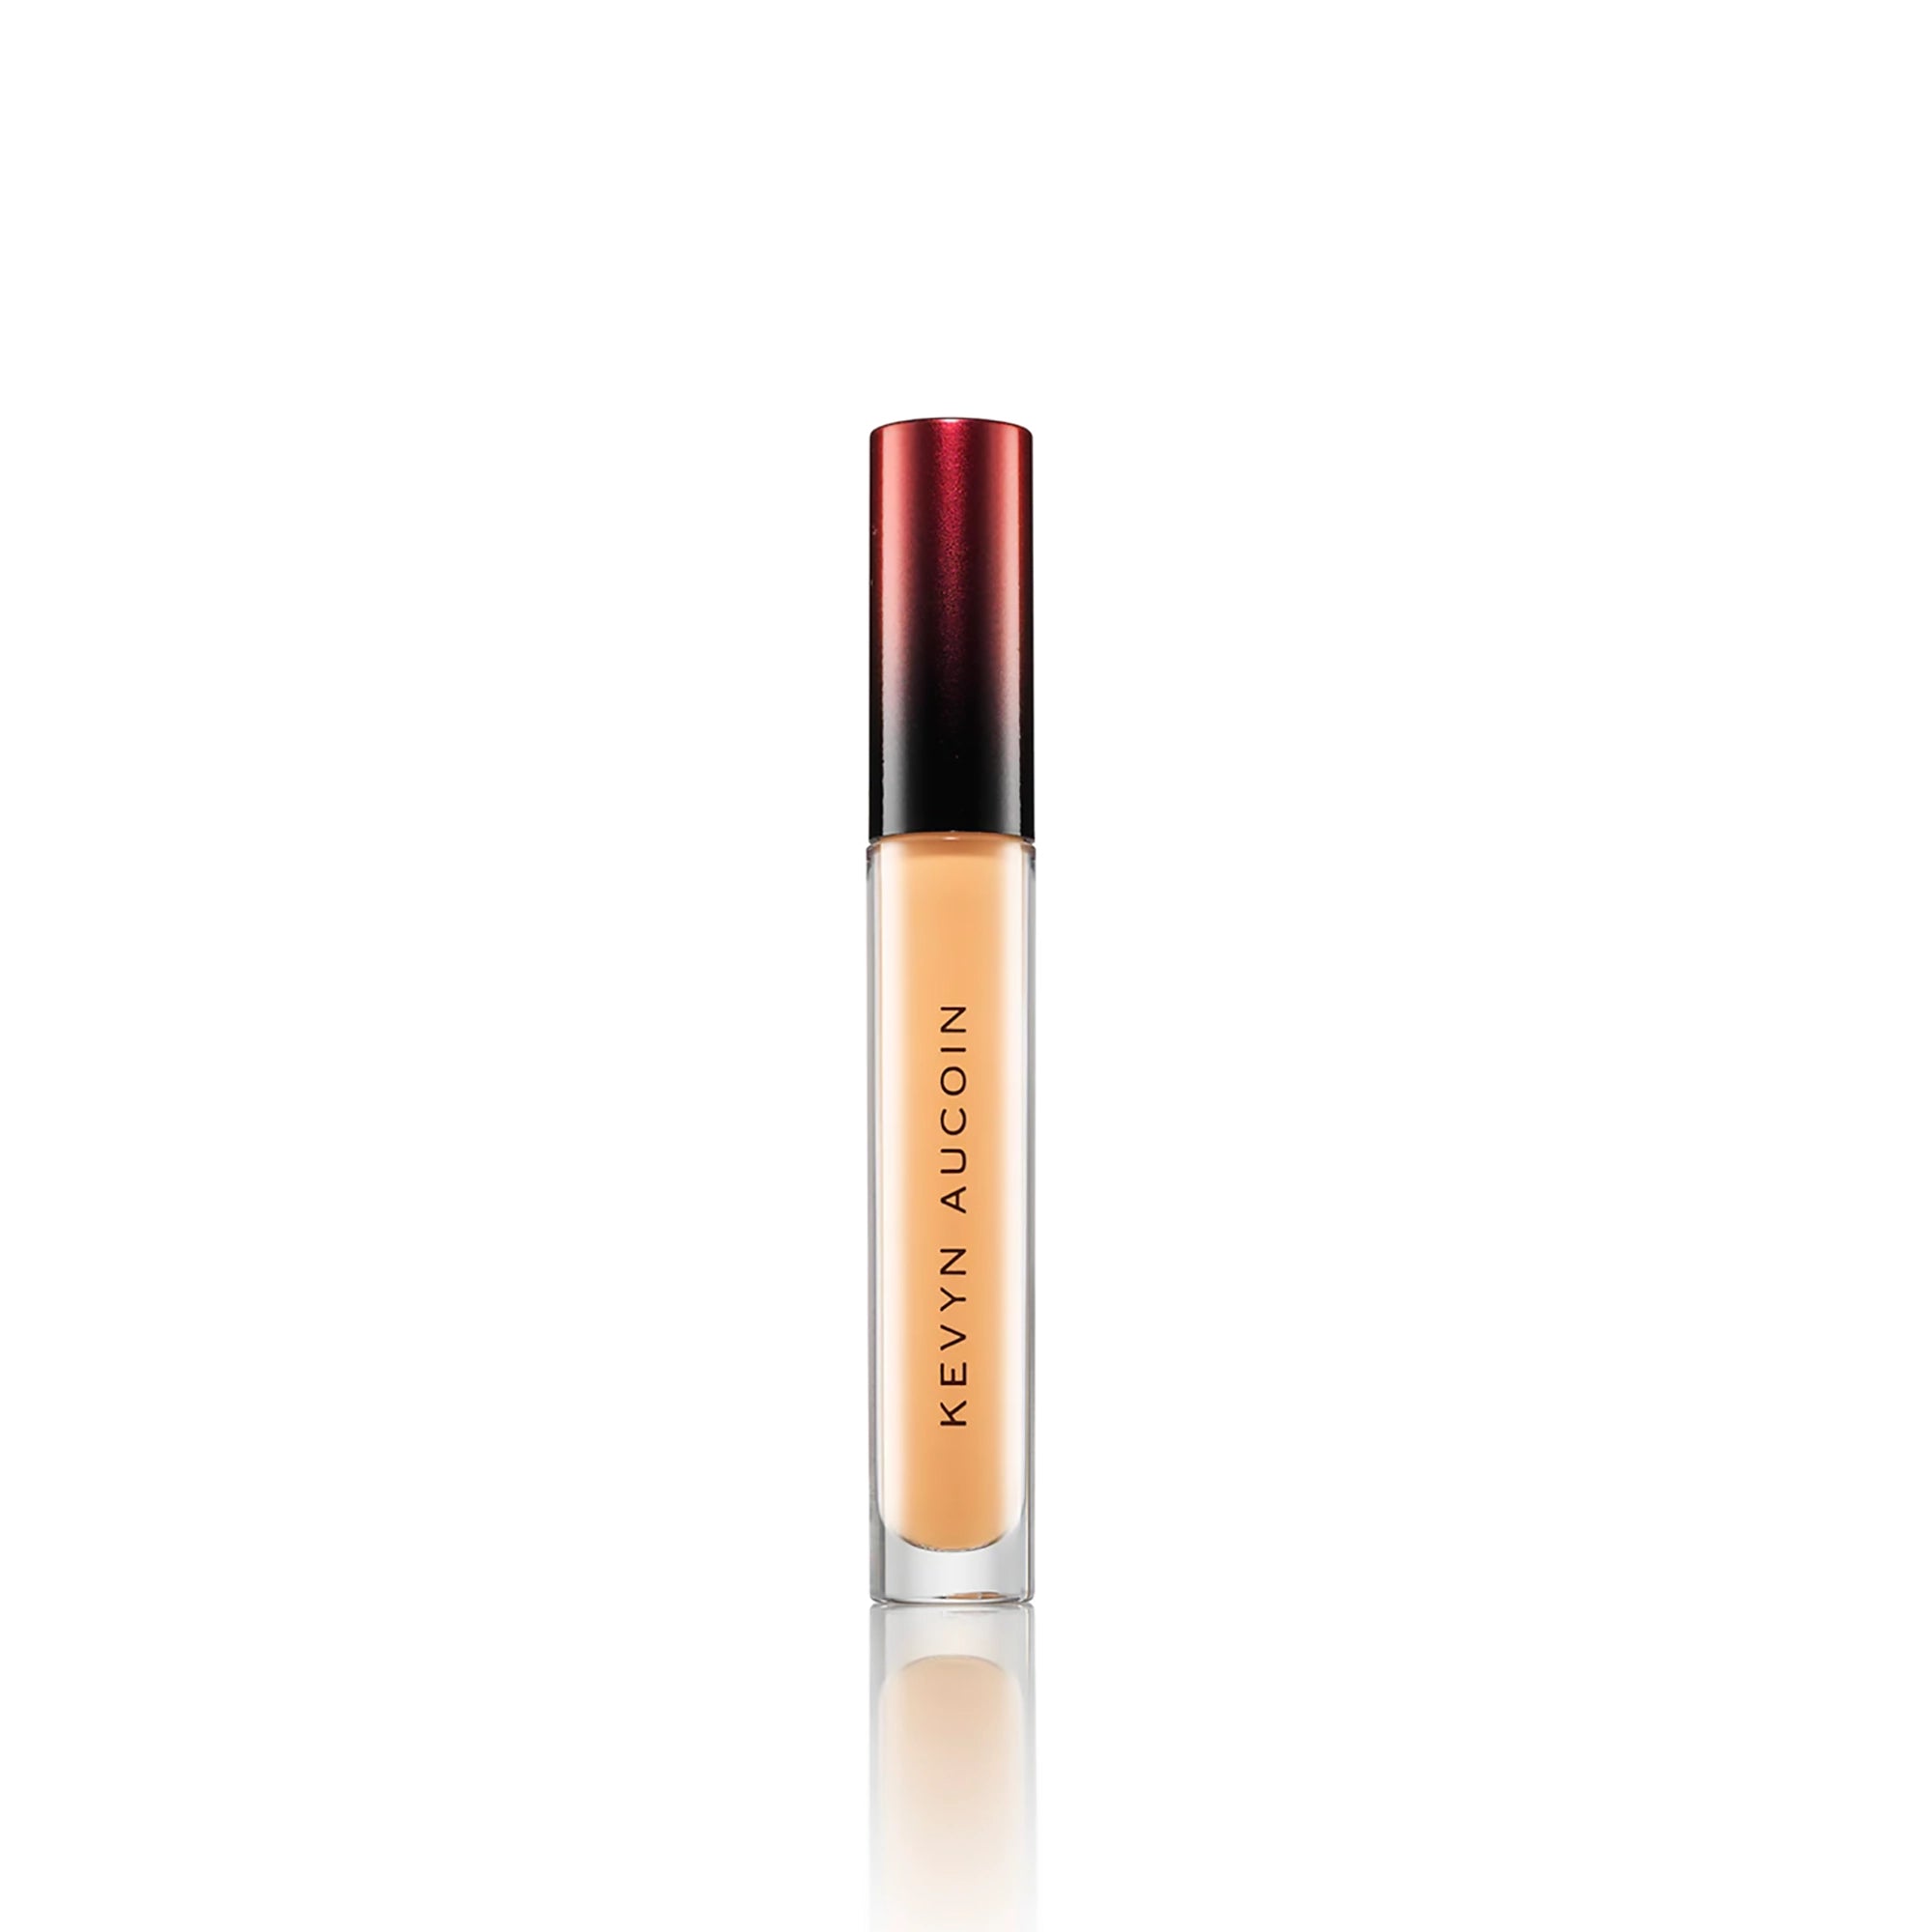 Kevyn Aucoin The Etherealist Super Natural Concealer / MEDIUM 4